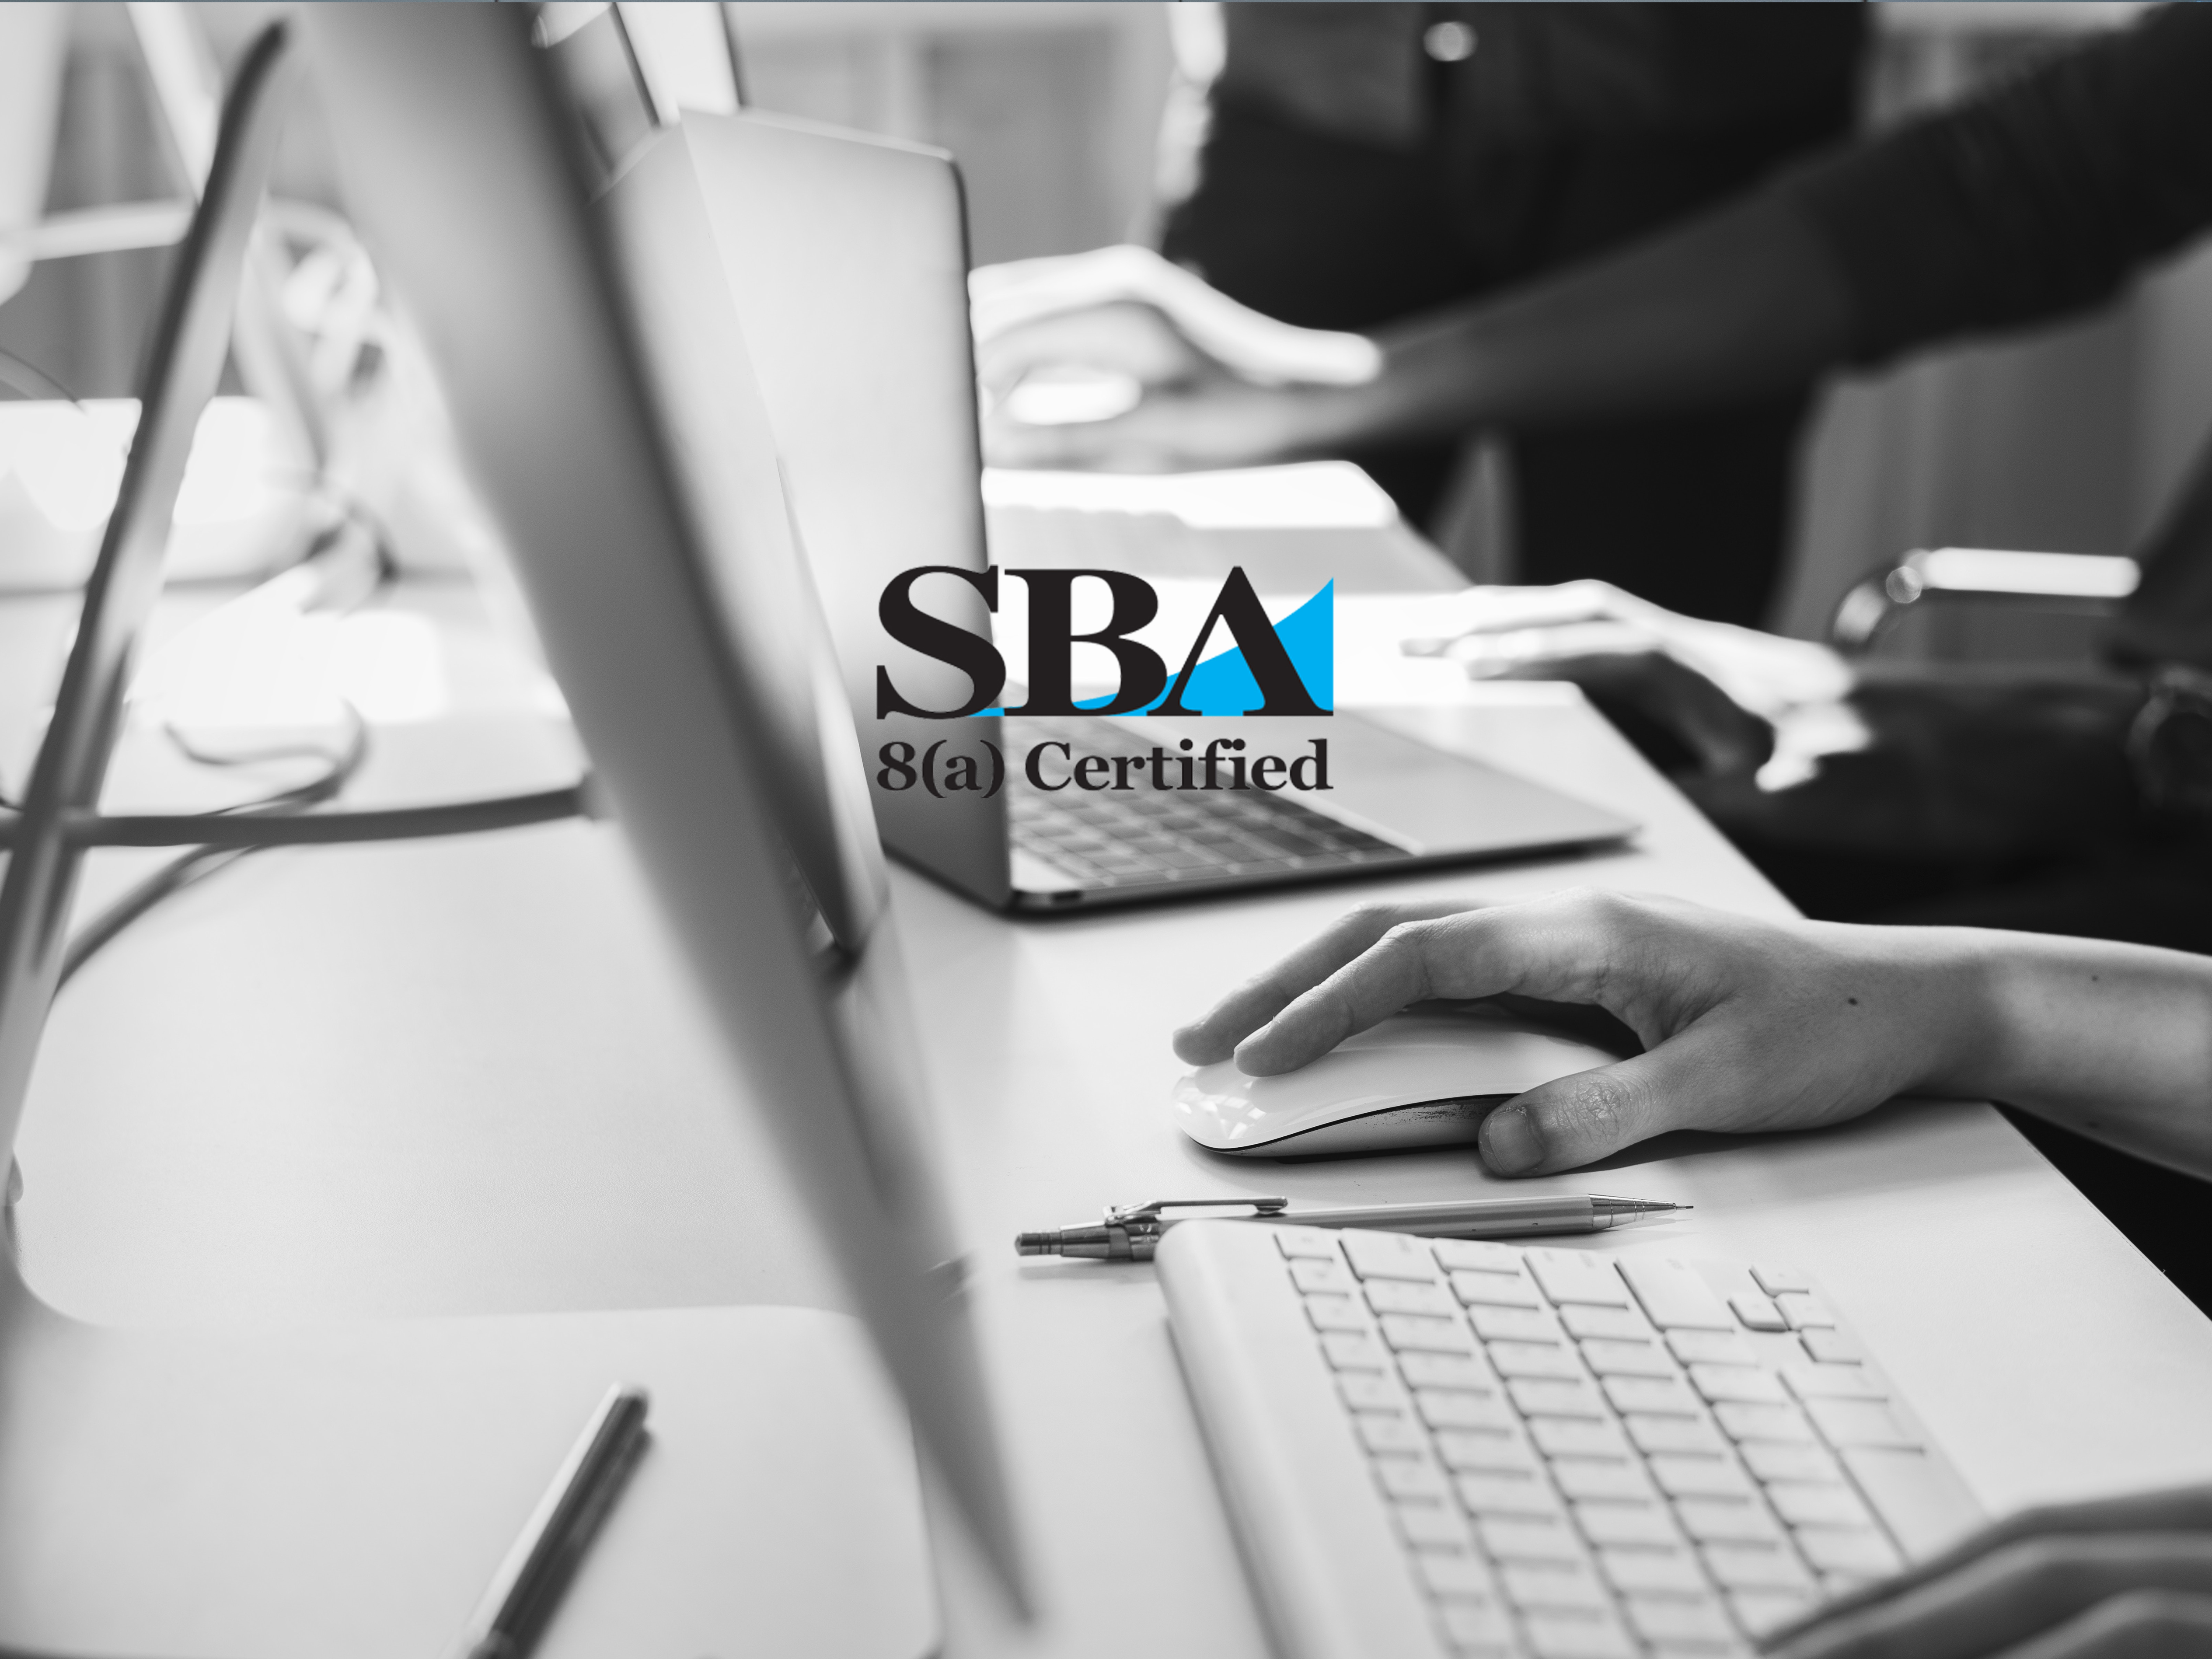 Cynergy Professional Systems Announces SBA 8(a) Certification